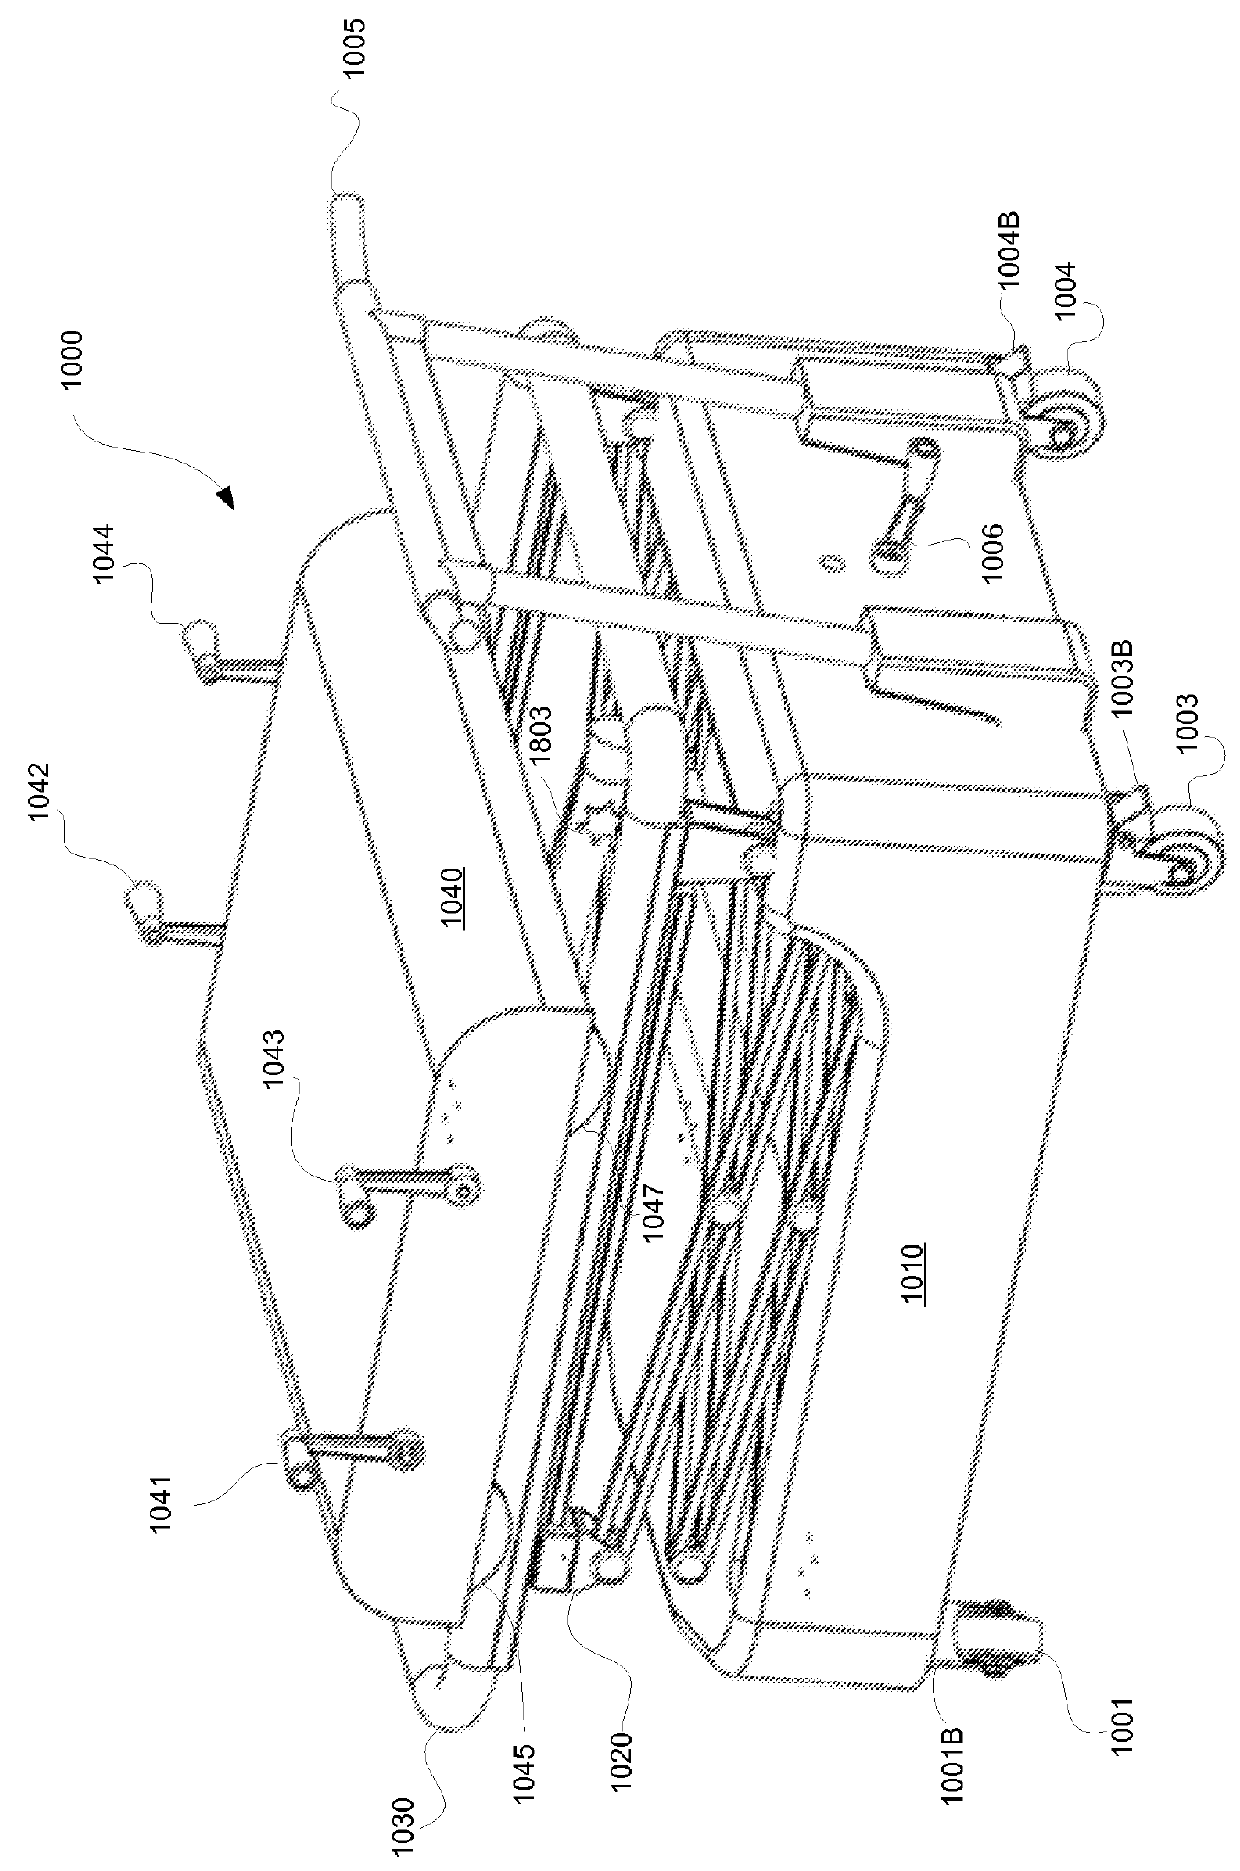 Patient transport apparatus for transport between a patient bed and a bathtub